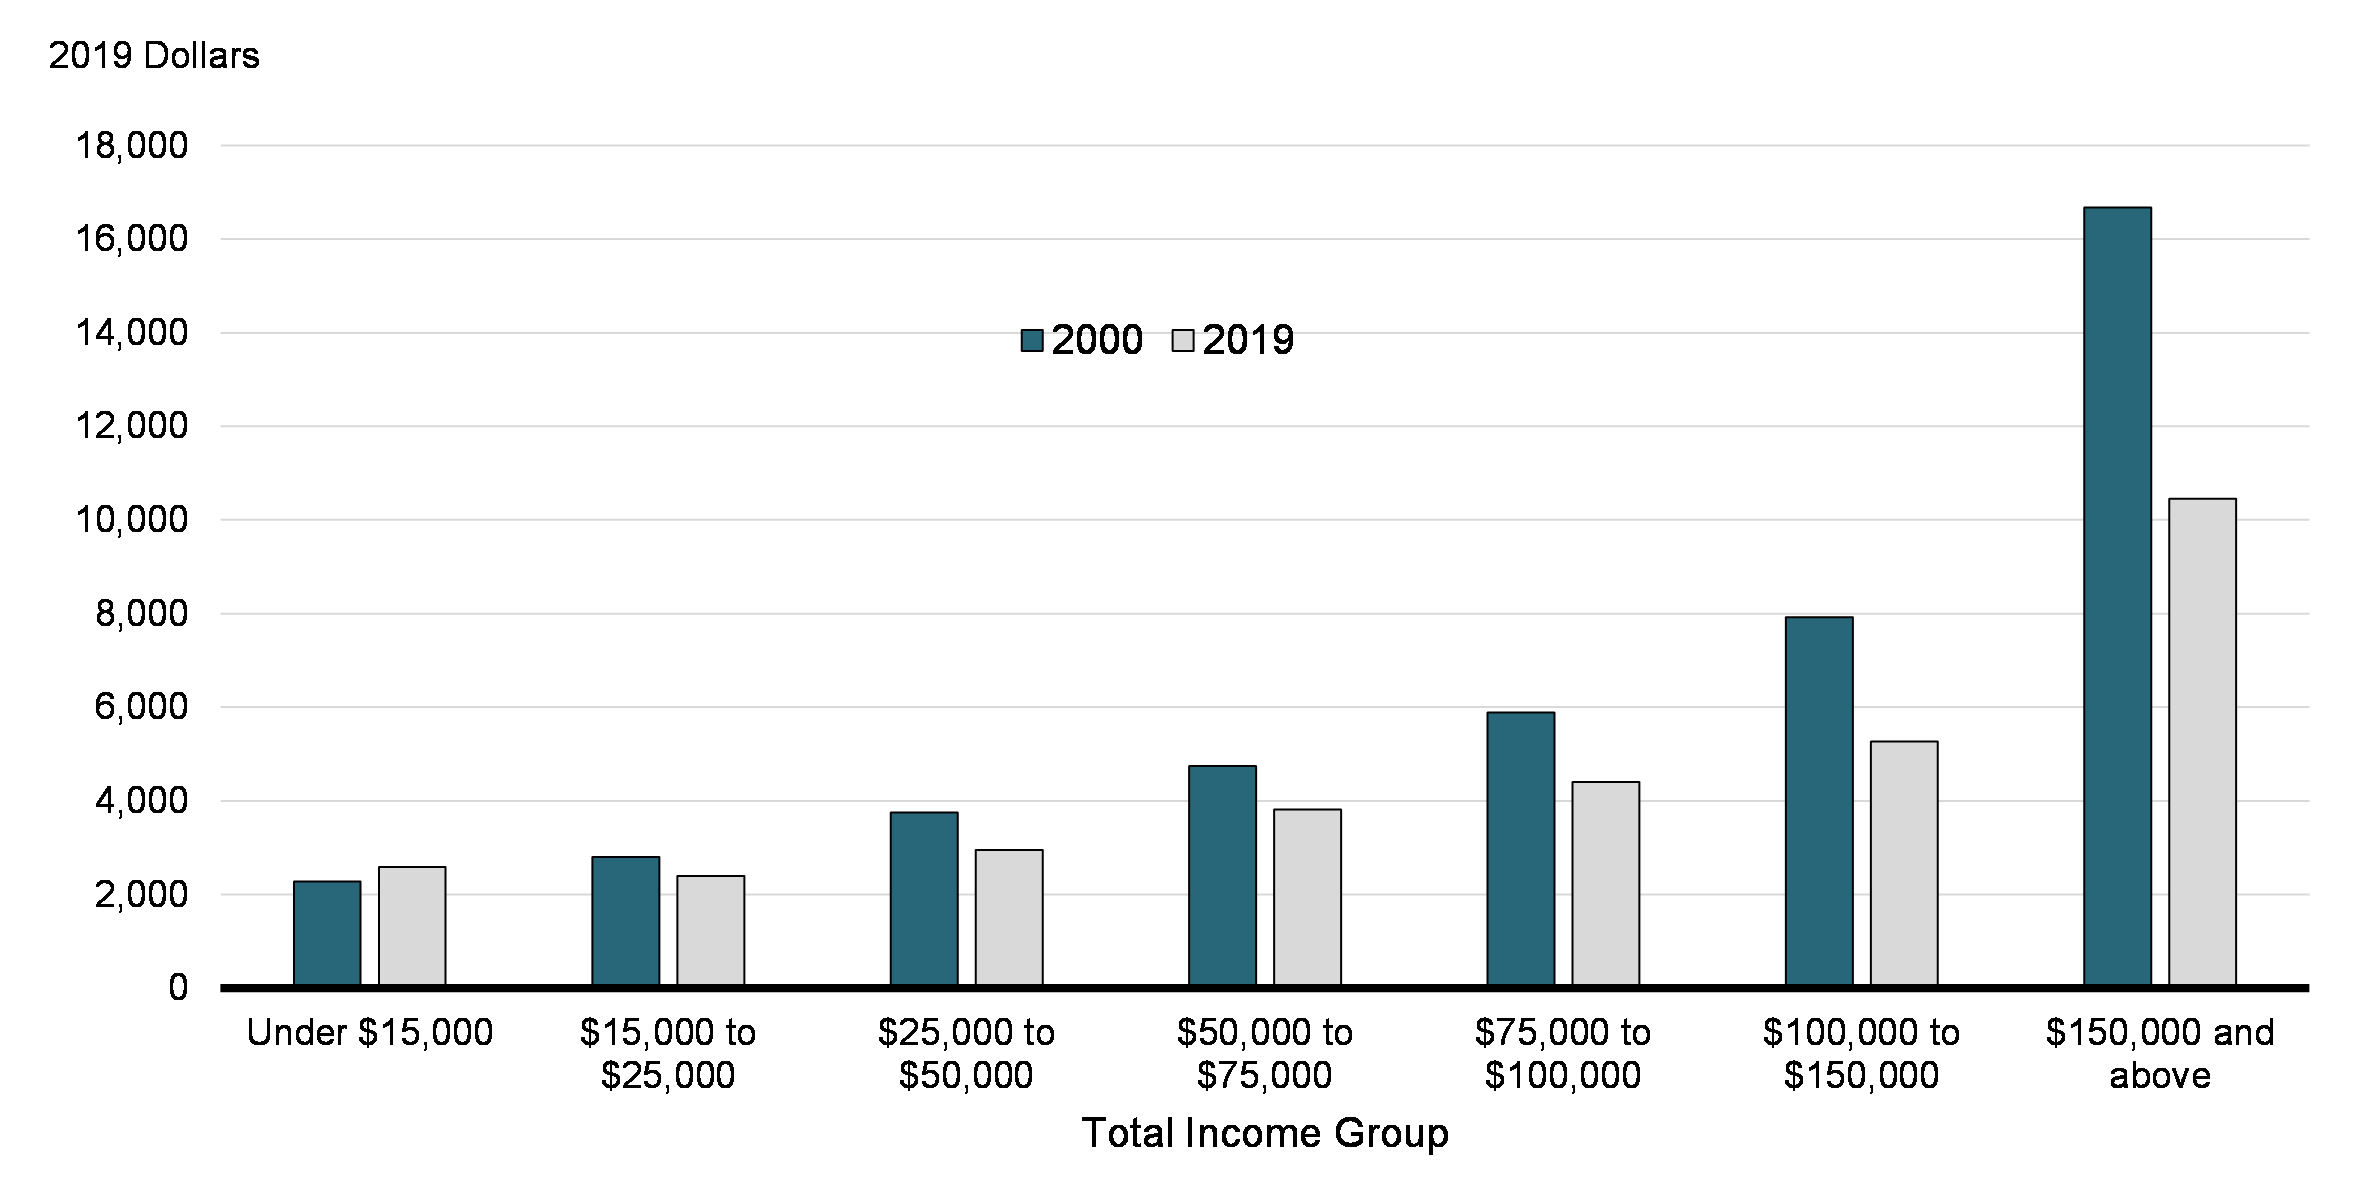  Chart 25: Average OEE Amount Claimed, by Income Group (2000 and 2019)
